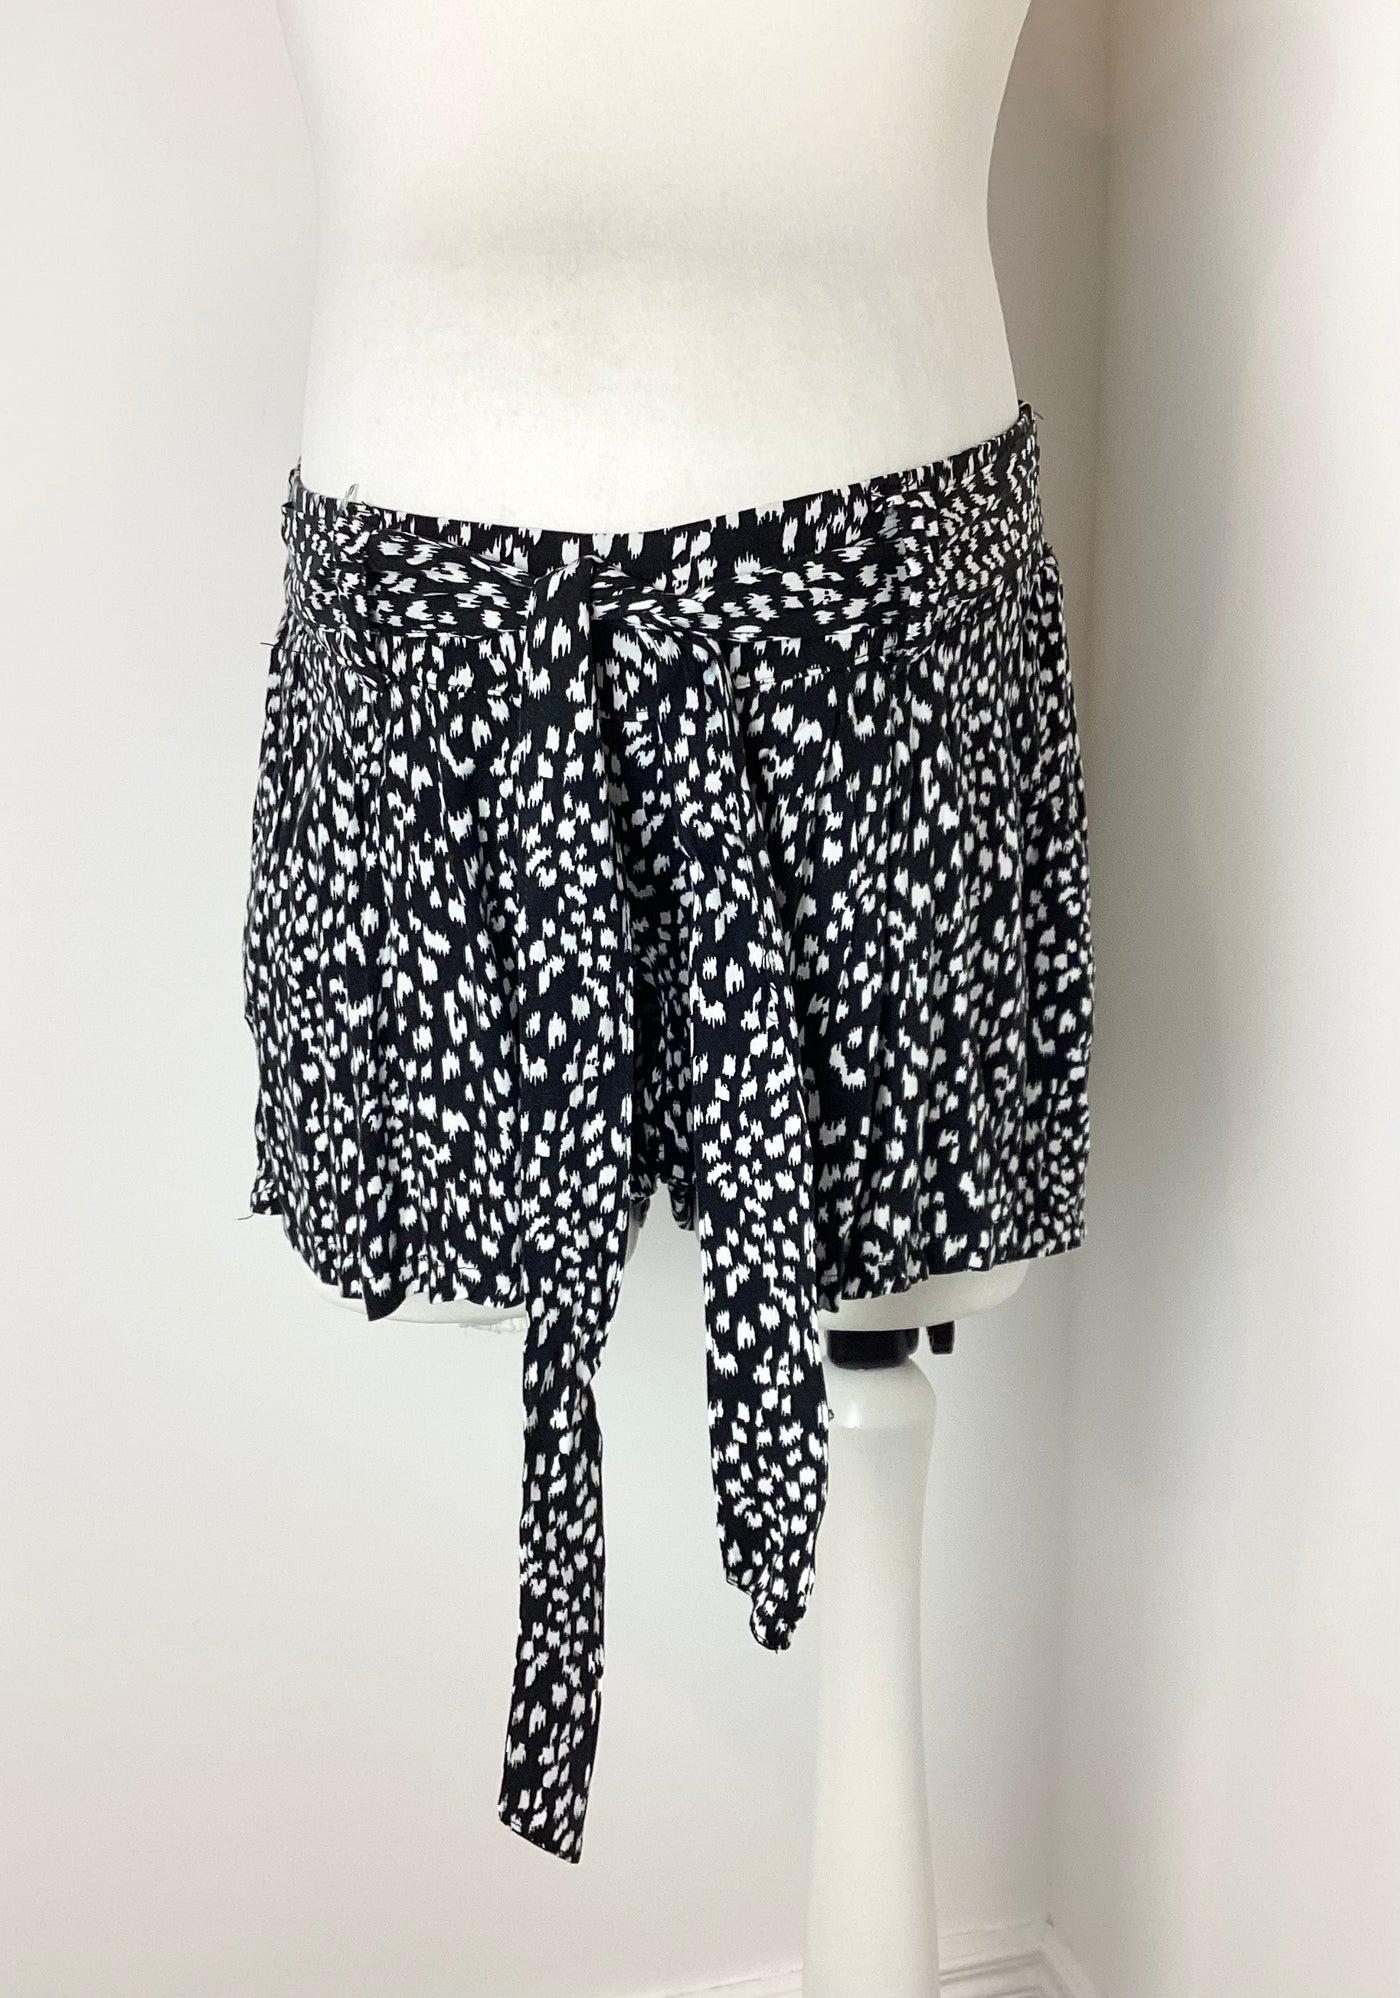 Seraphine black & white print shorts with pockets & waist tie - Size M (Approx UK 10/12)